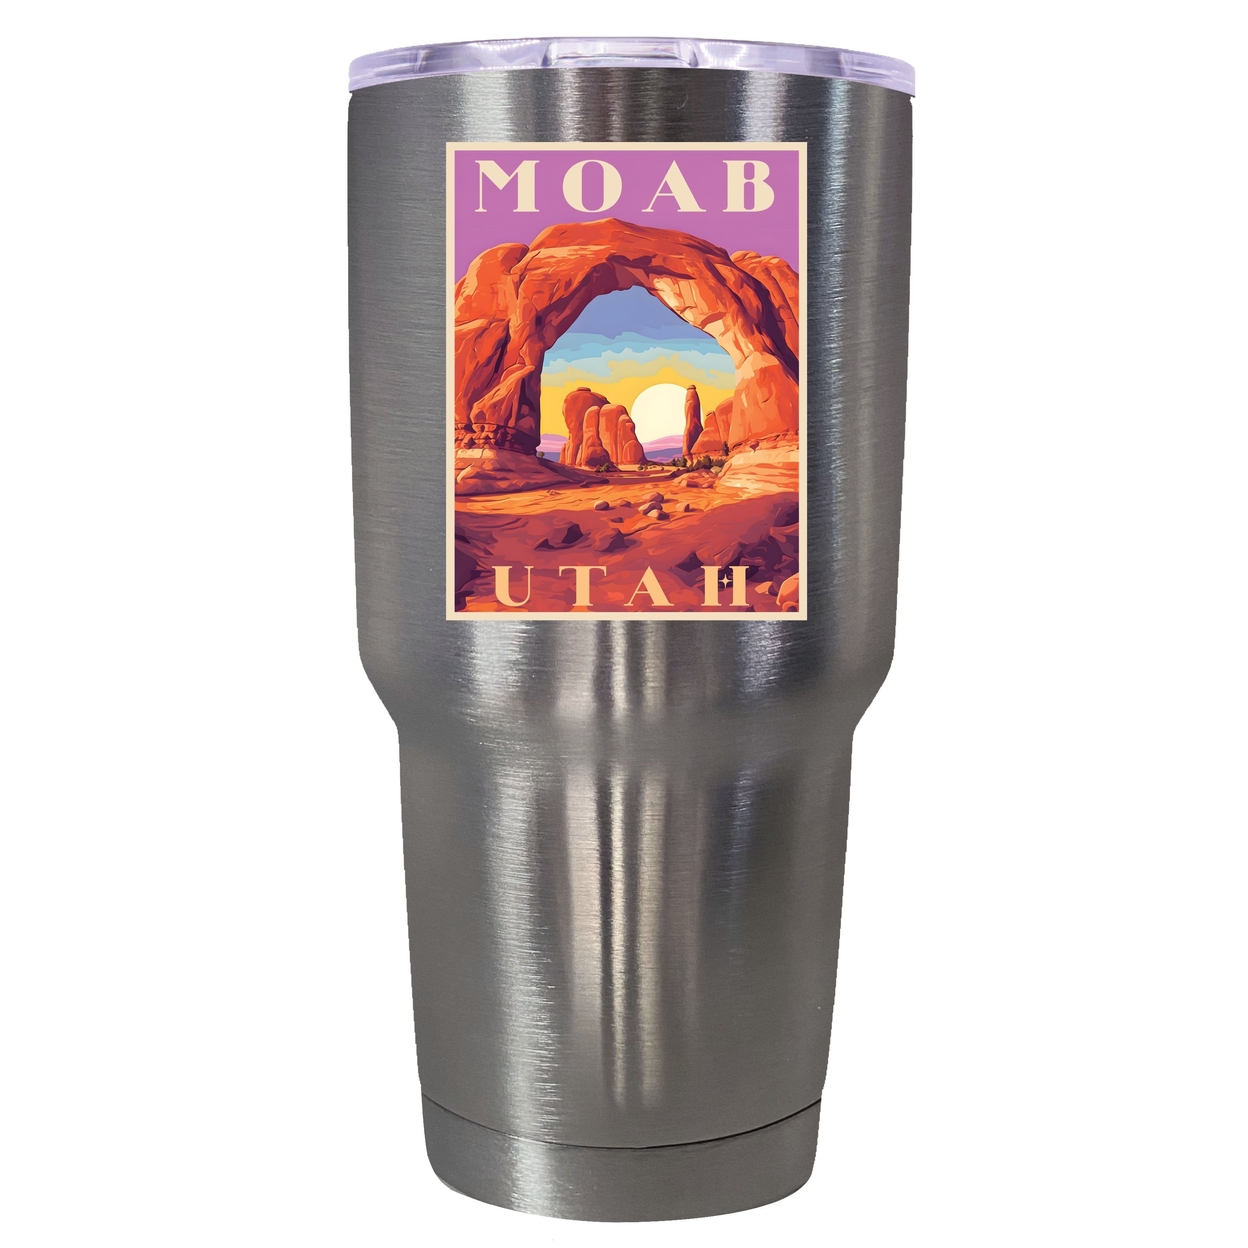 Moab Utah Souvenir 24 Oz Insulated Stainless Steel Tumbler - Stainless Steel,,4-Pack